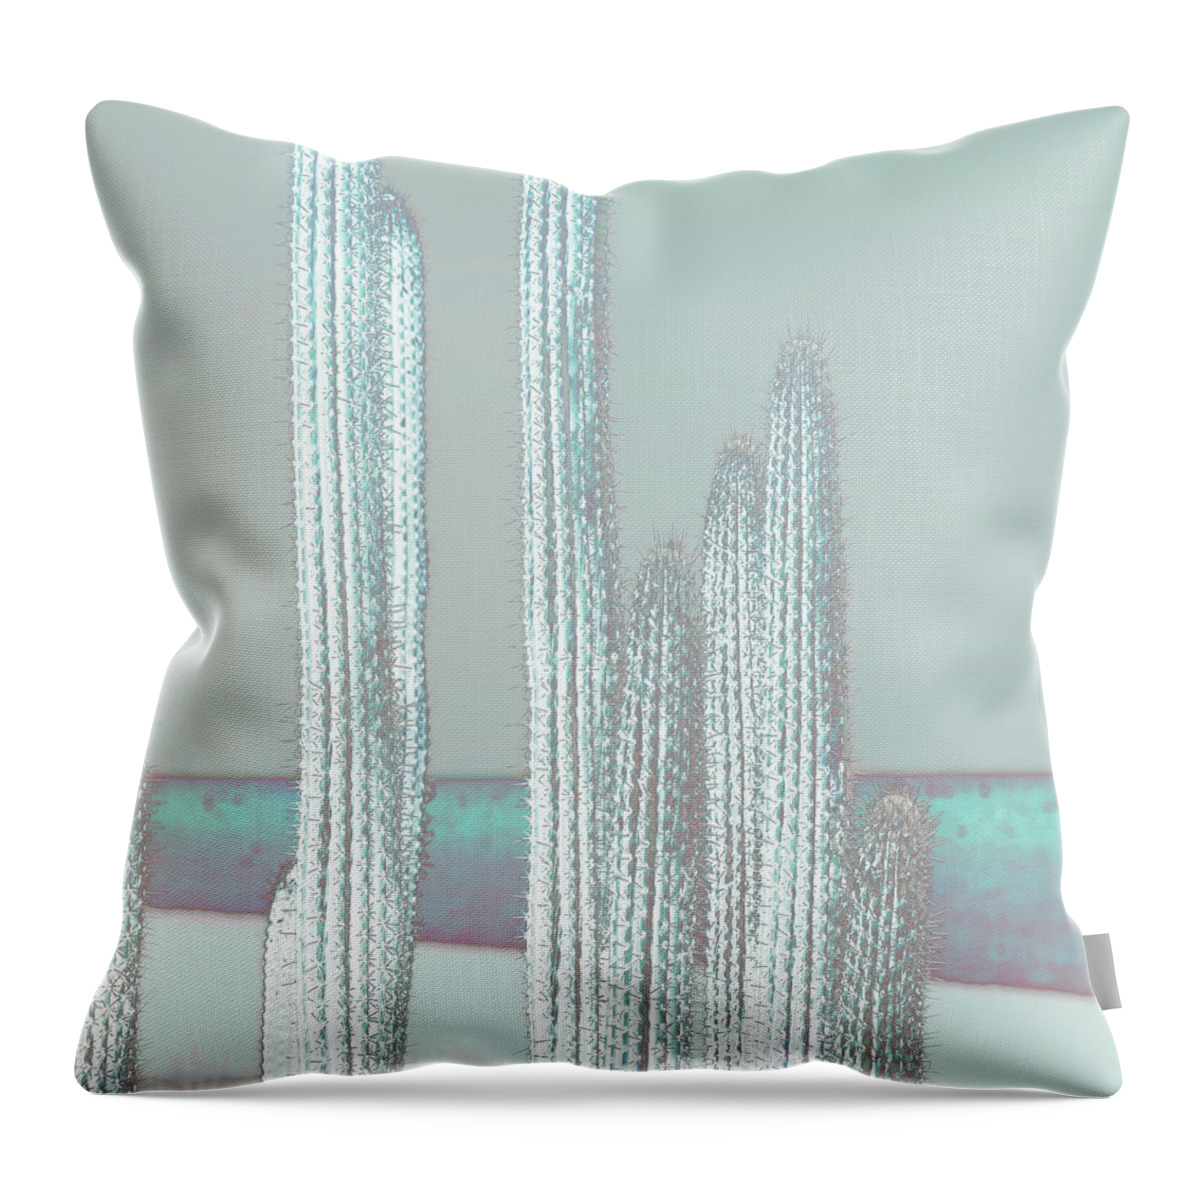 Digital Art Throw Pillow featuring the digital art Cactus-blues by Suzanne Carter